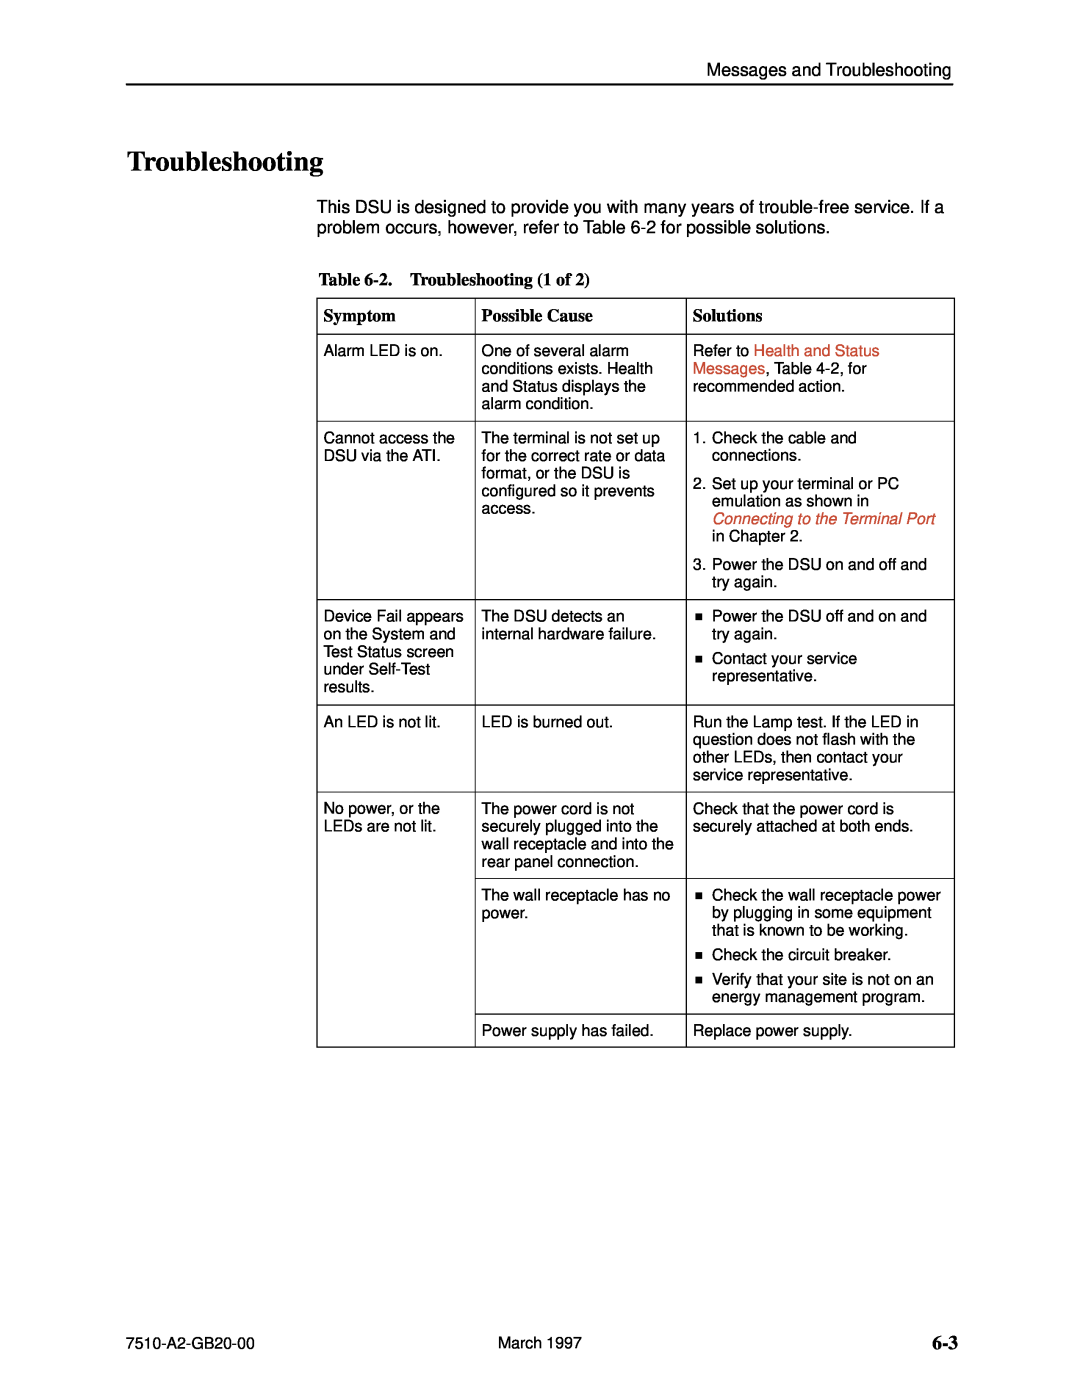 Paradyne 727 manual 2.Troubleshooting 1 of, Symptom, Possible Cause, Solutions, Refer to Health and Status 